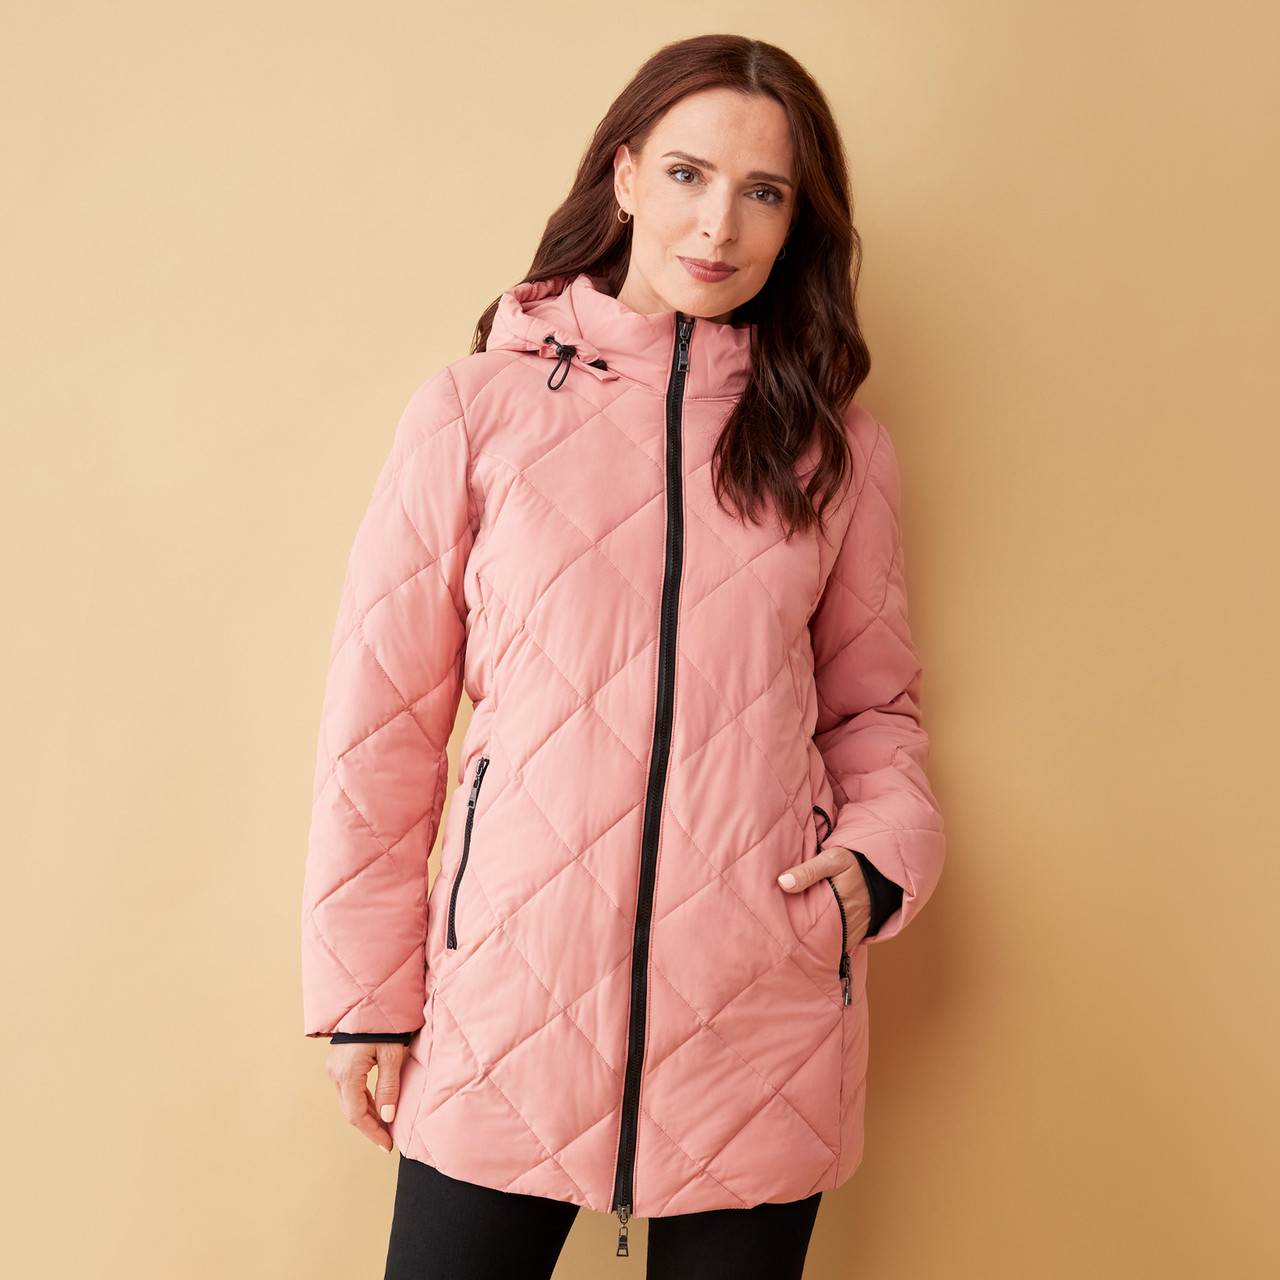 Women's Removable Hood Jacket | Northern Reflections